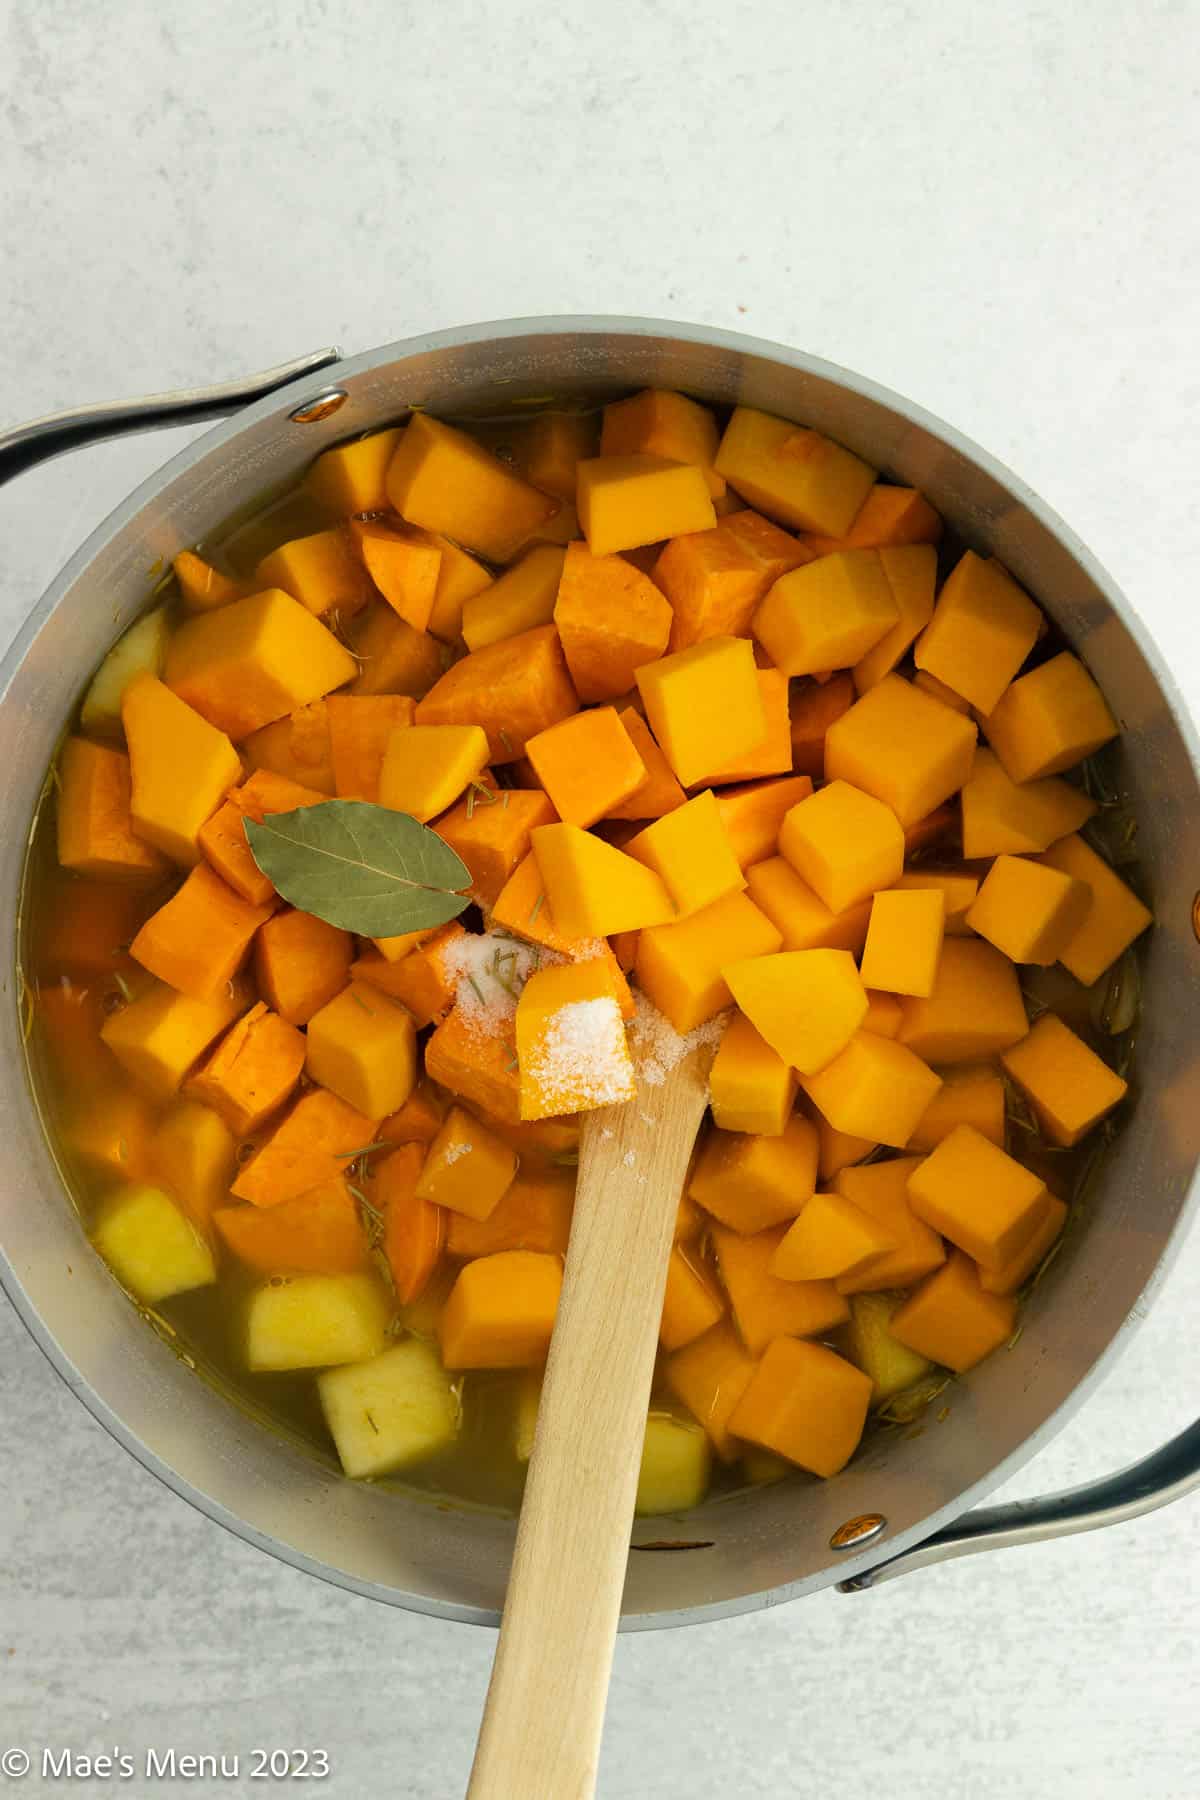 A big pit with veggies, butternut squash, and sweet potato, and a wooden spoon.